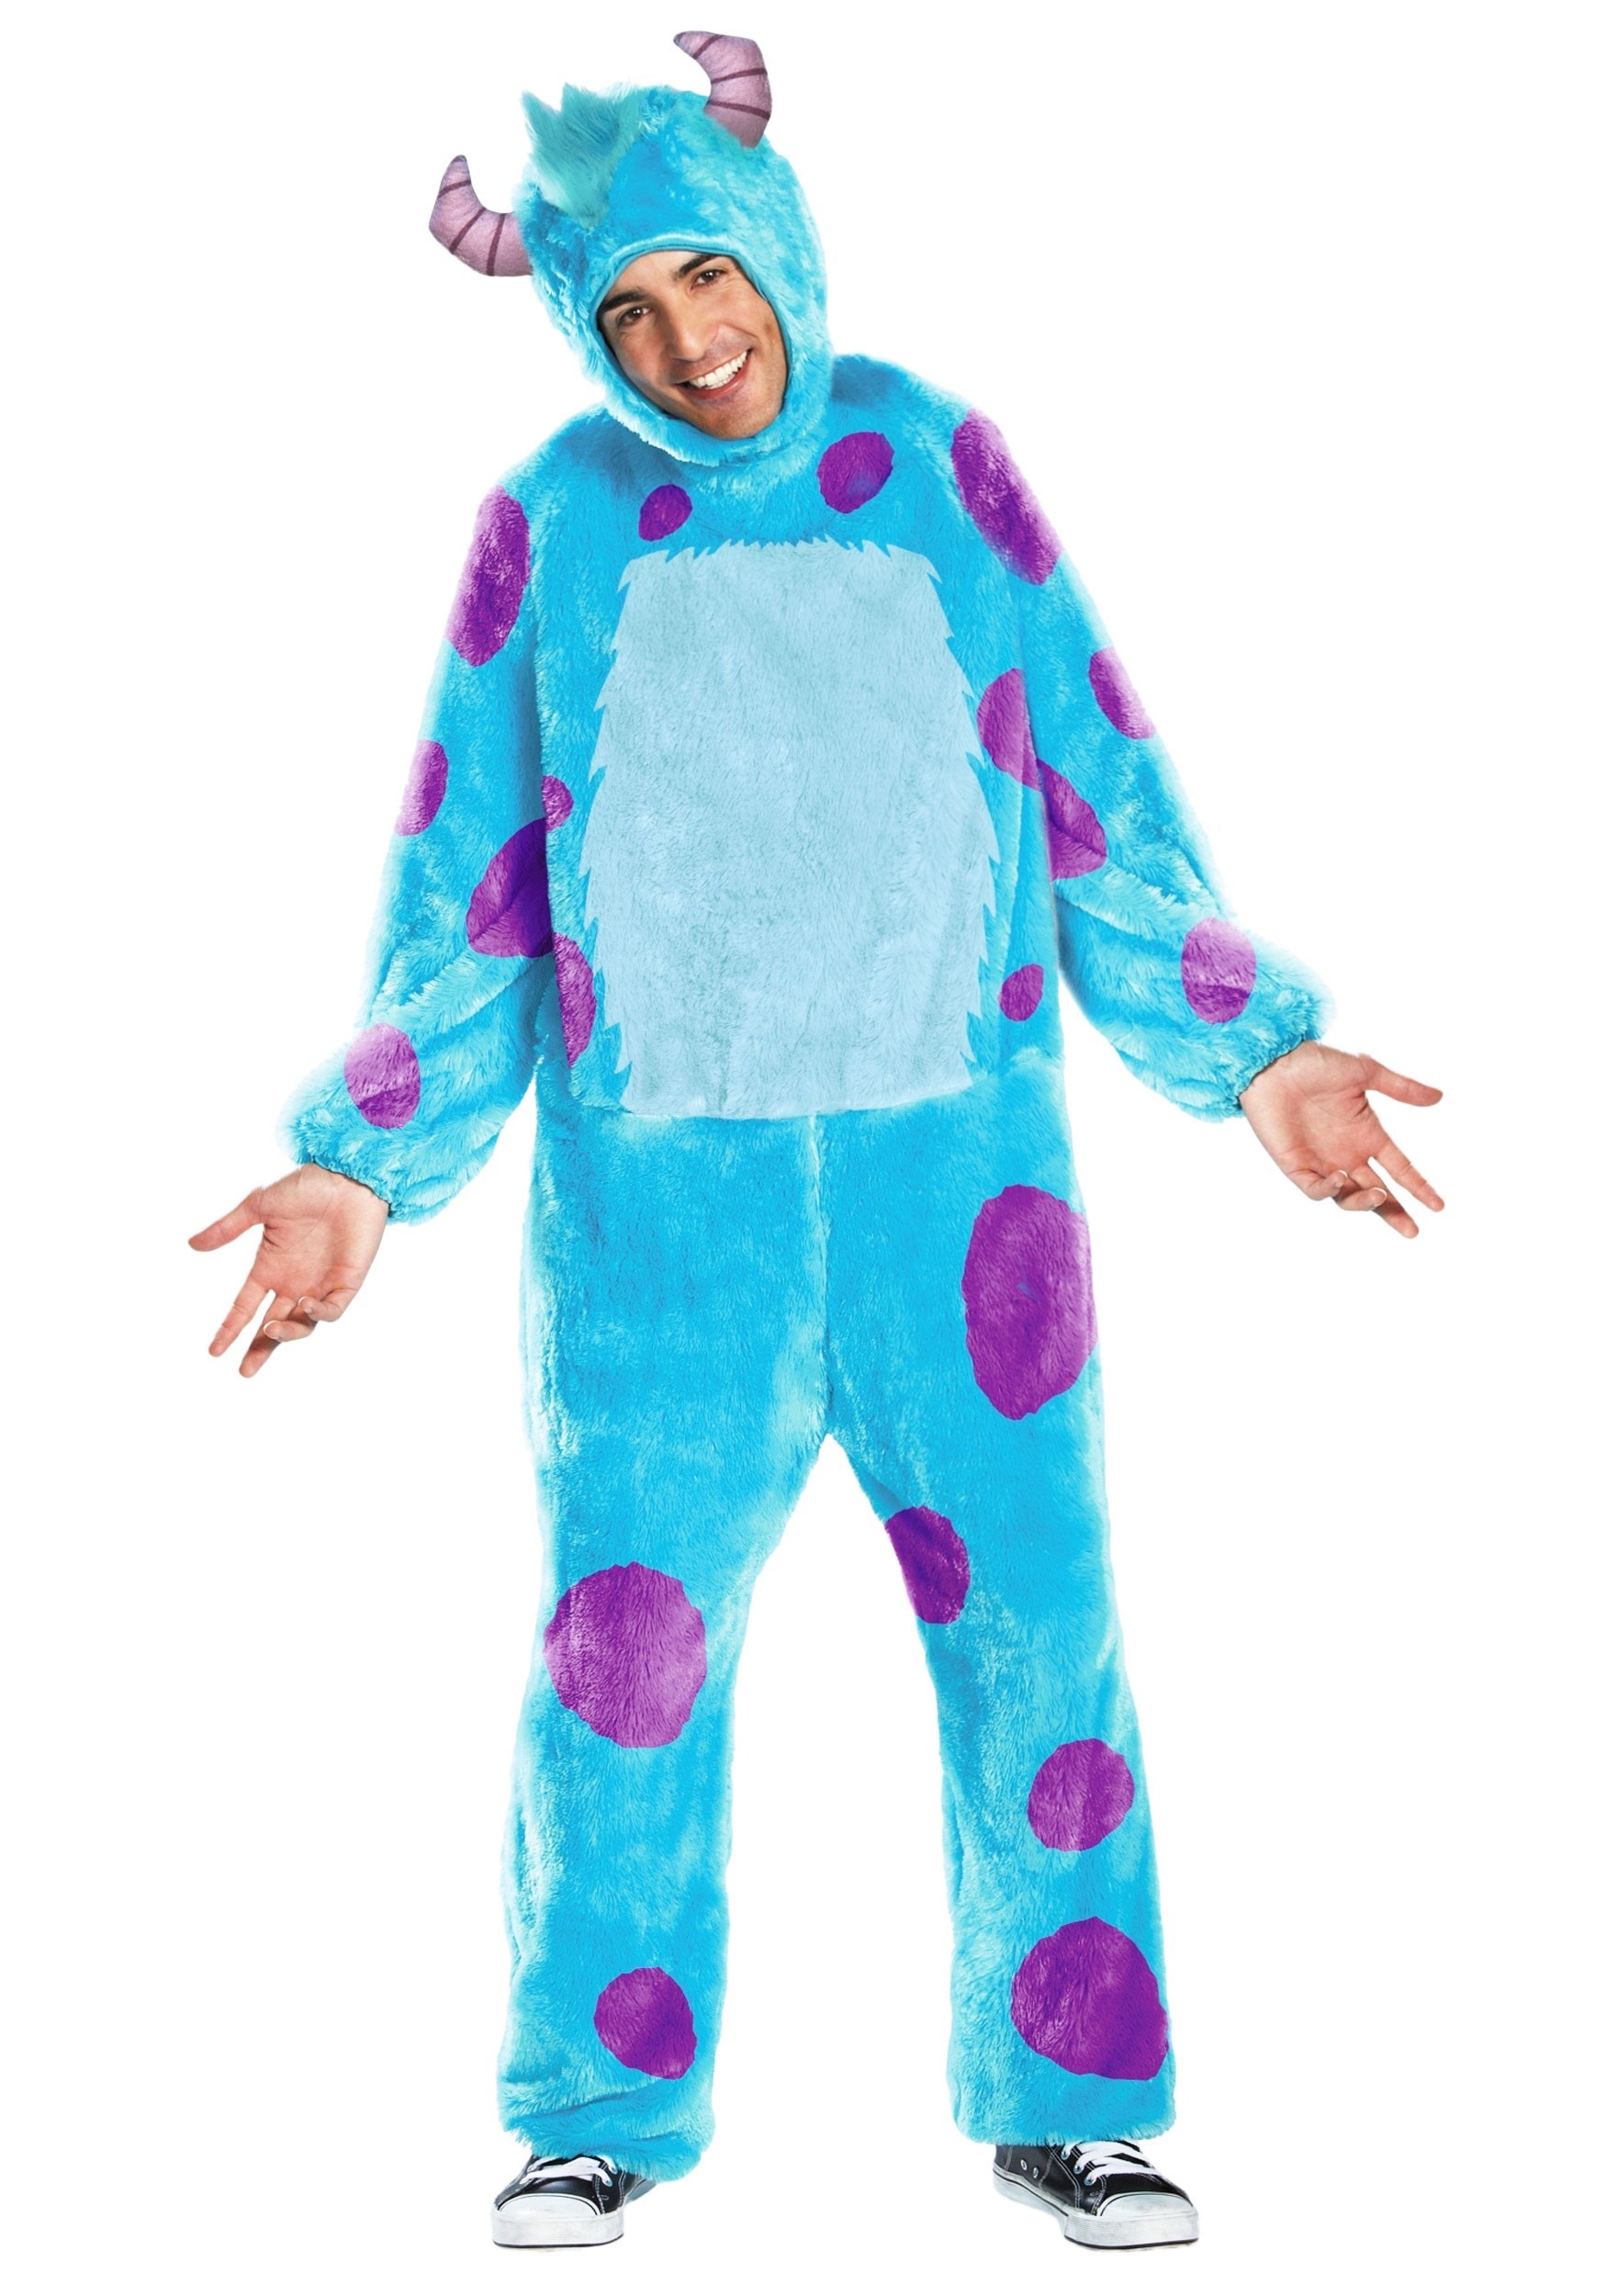 Image of Monsters Inc Sulley Costume for Adults ID DI69322-S